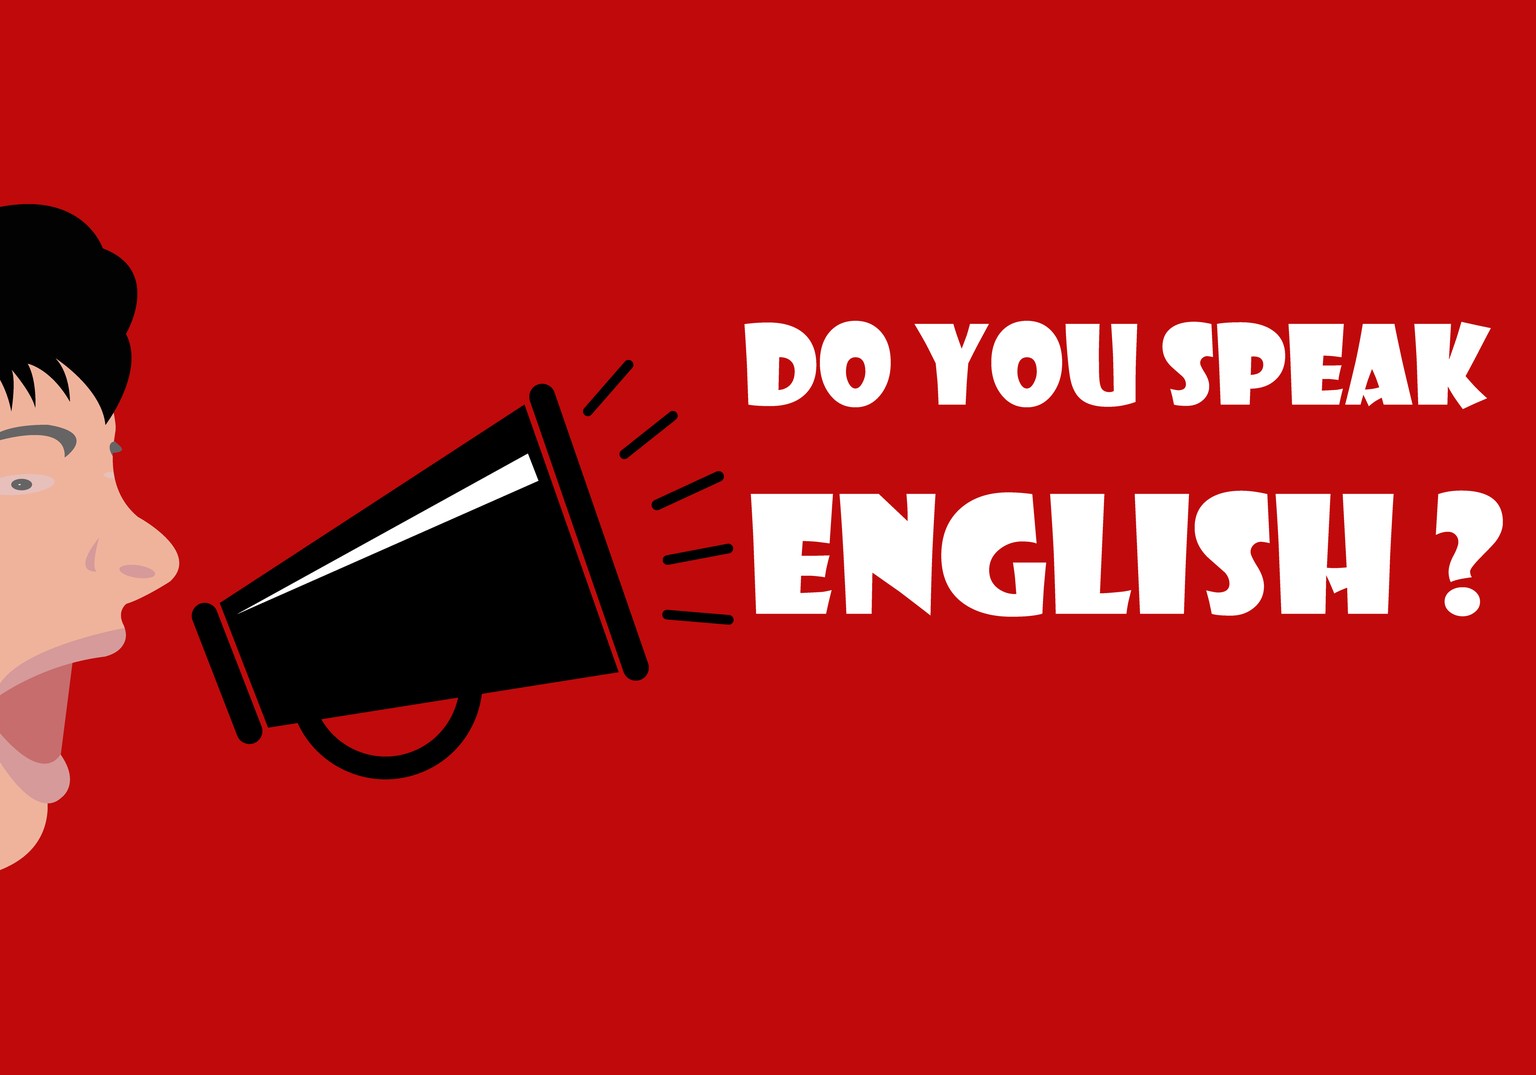 People yell over the megaphone. Do you speak English? - Concept of learning English. Flat design, vector illustration